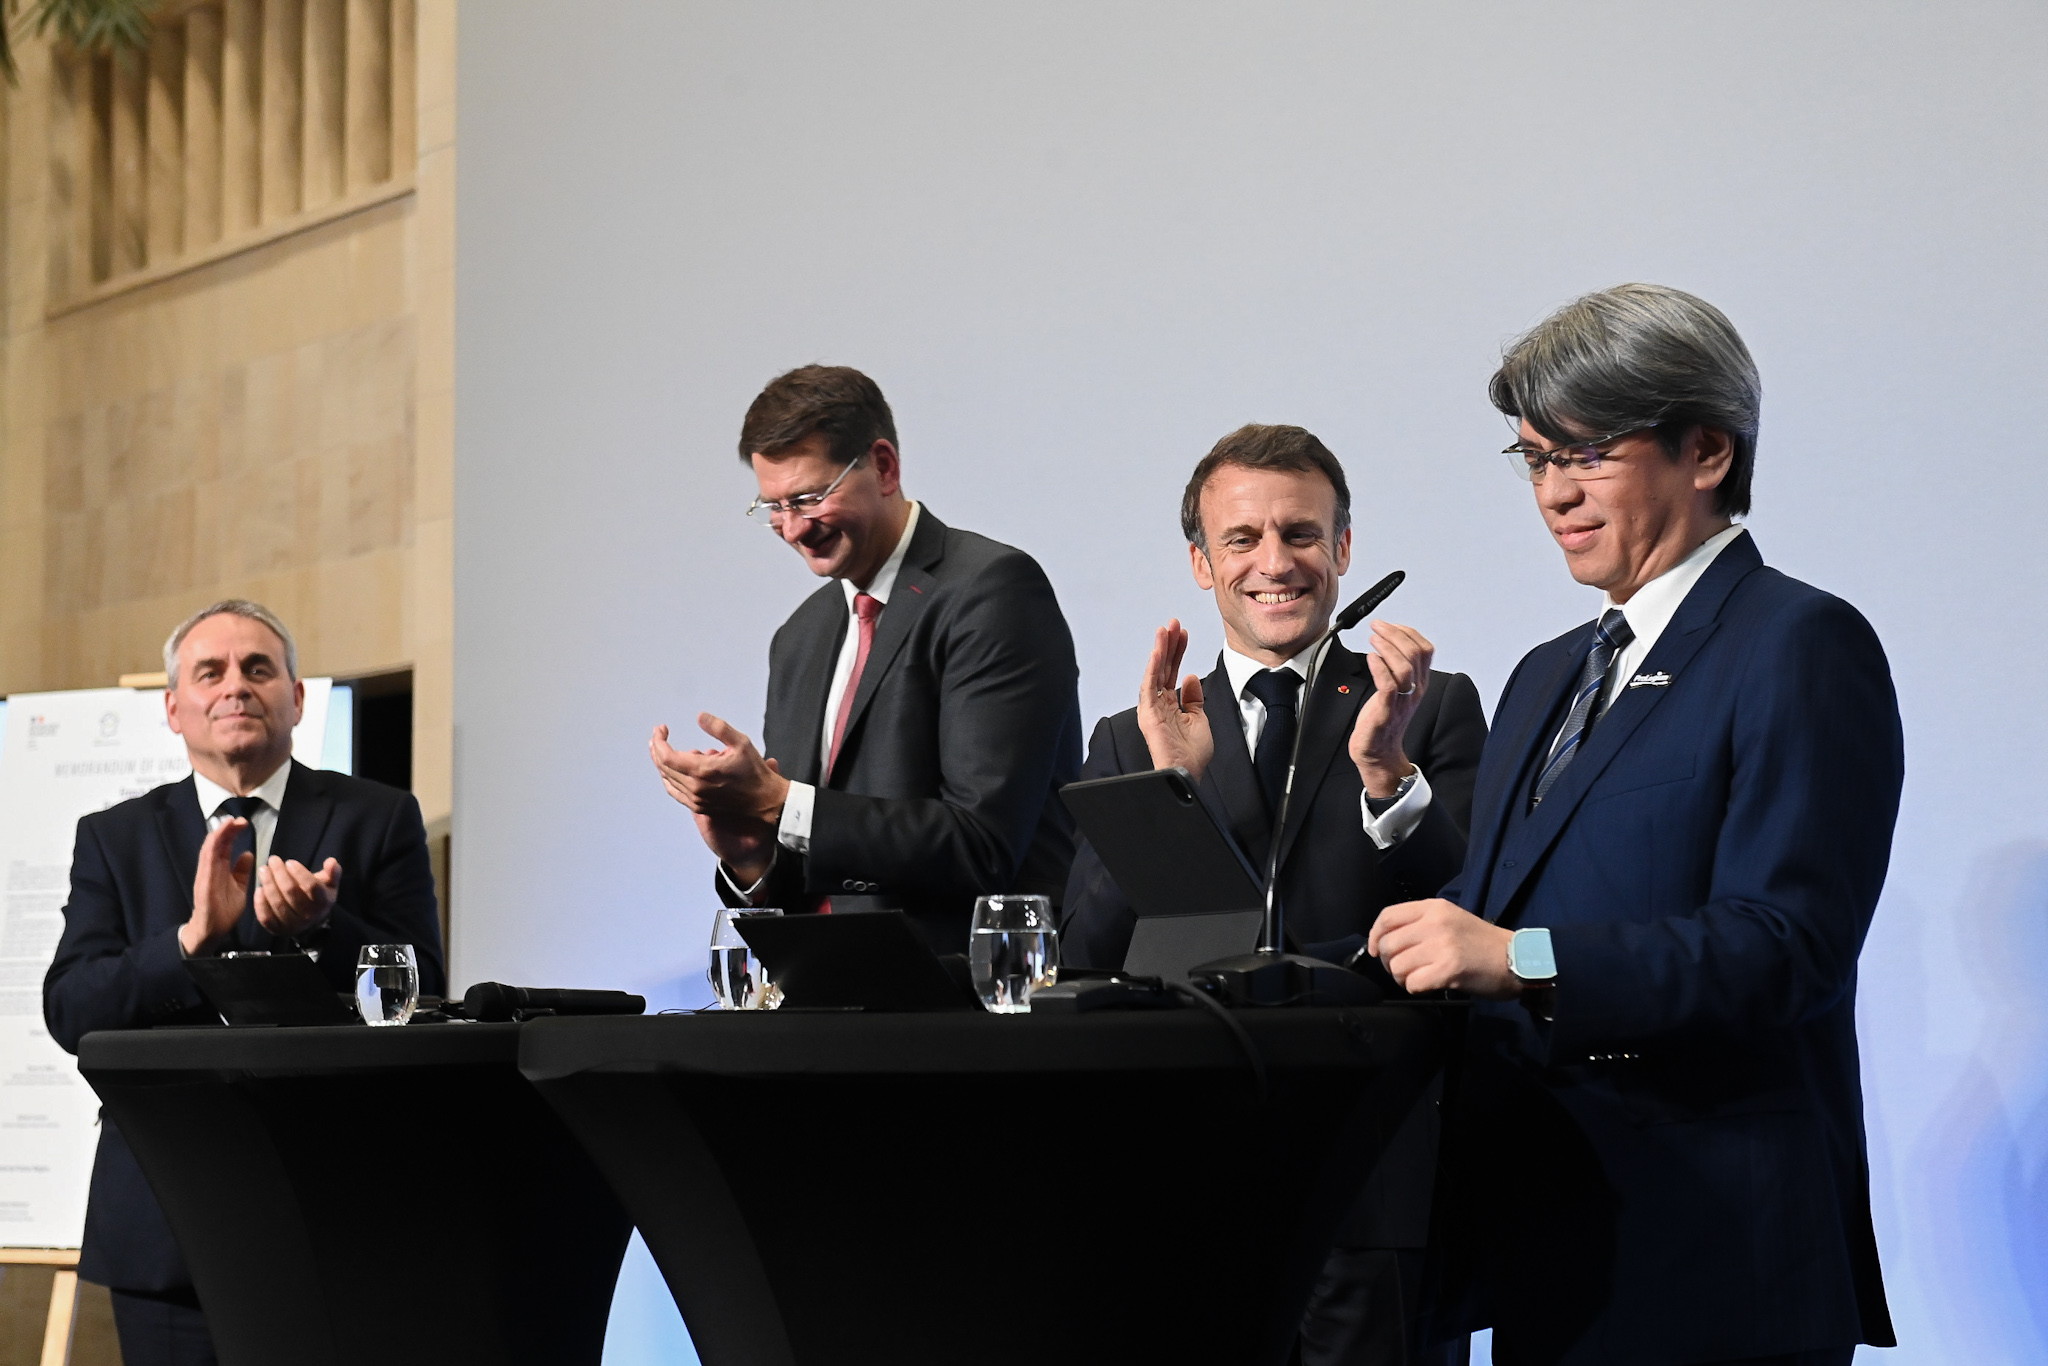 ProLogium Announces €5.2b Gigafactory in Dunkirk France and Greets French President Emmanuel Macron - ProLogium Technology Co., Ltd